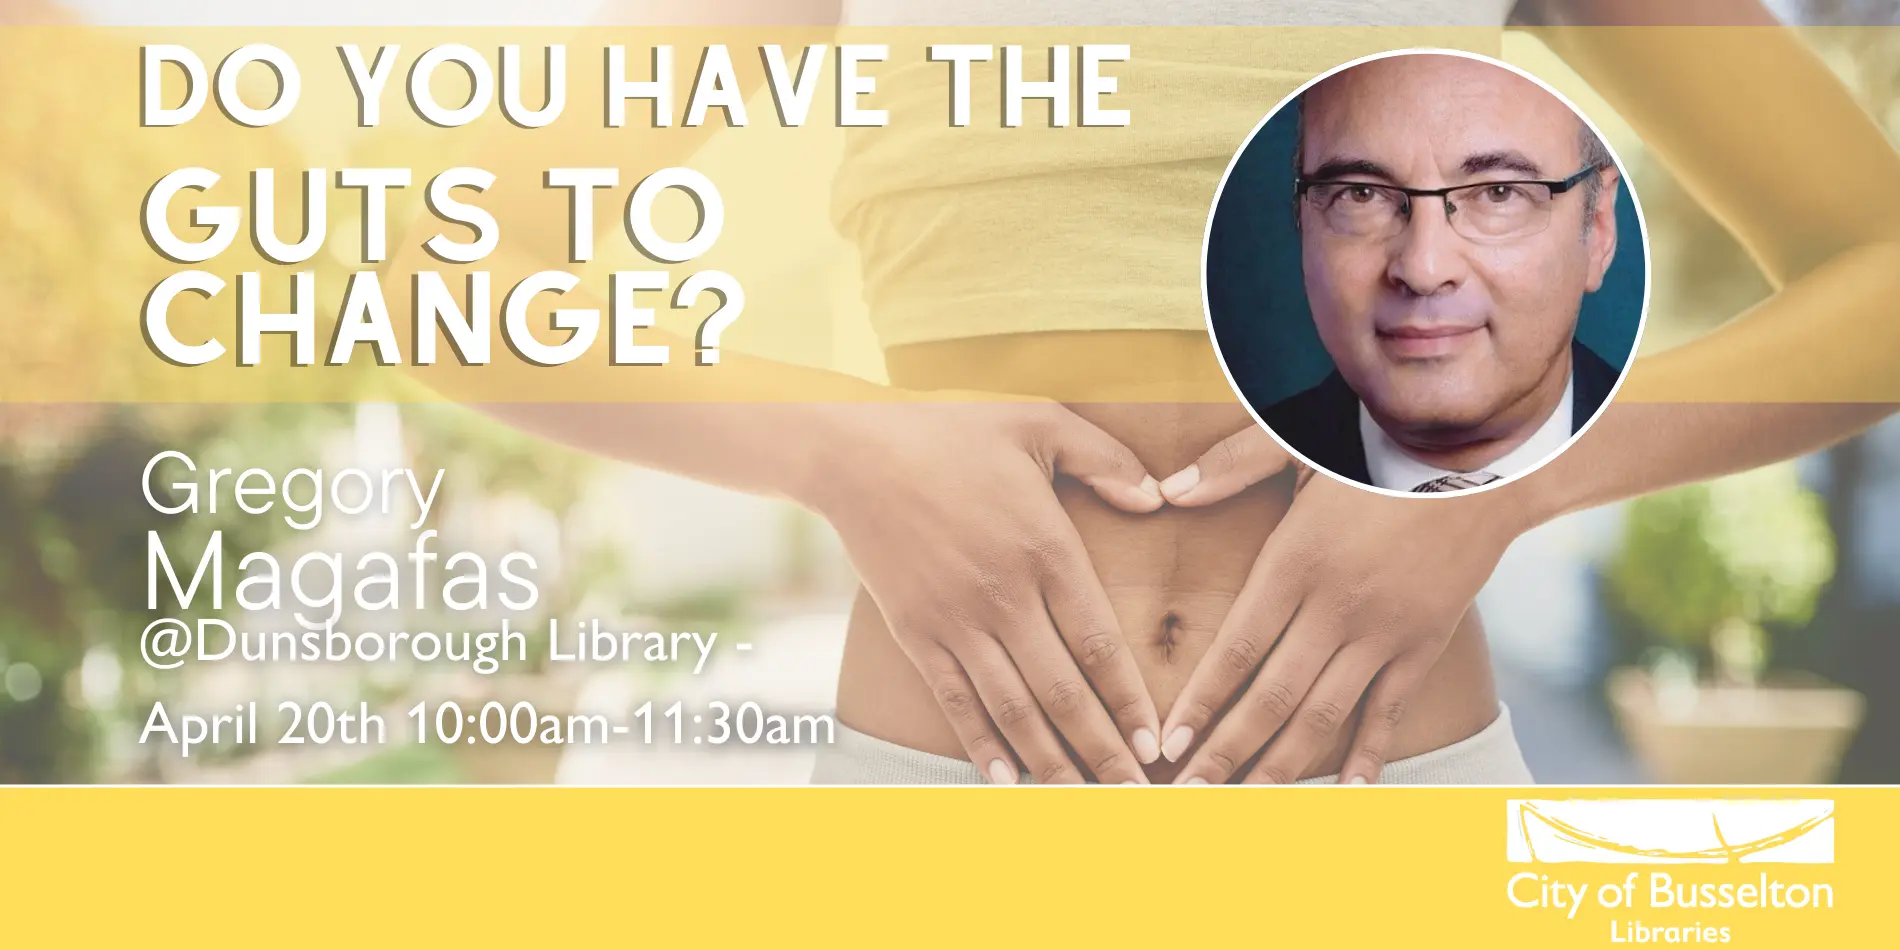 Do you have the guts to change? a lecture to be given by Gregory Magafas in Dunsborough Library on the 20th of April at 10am